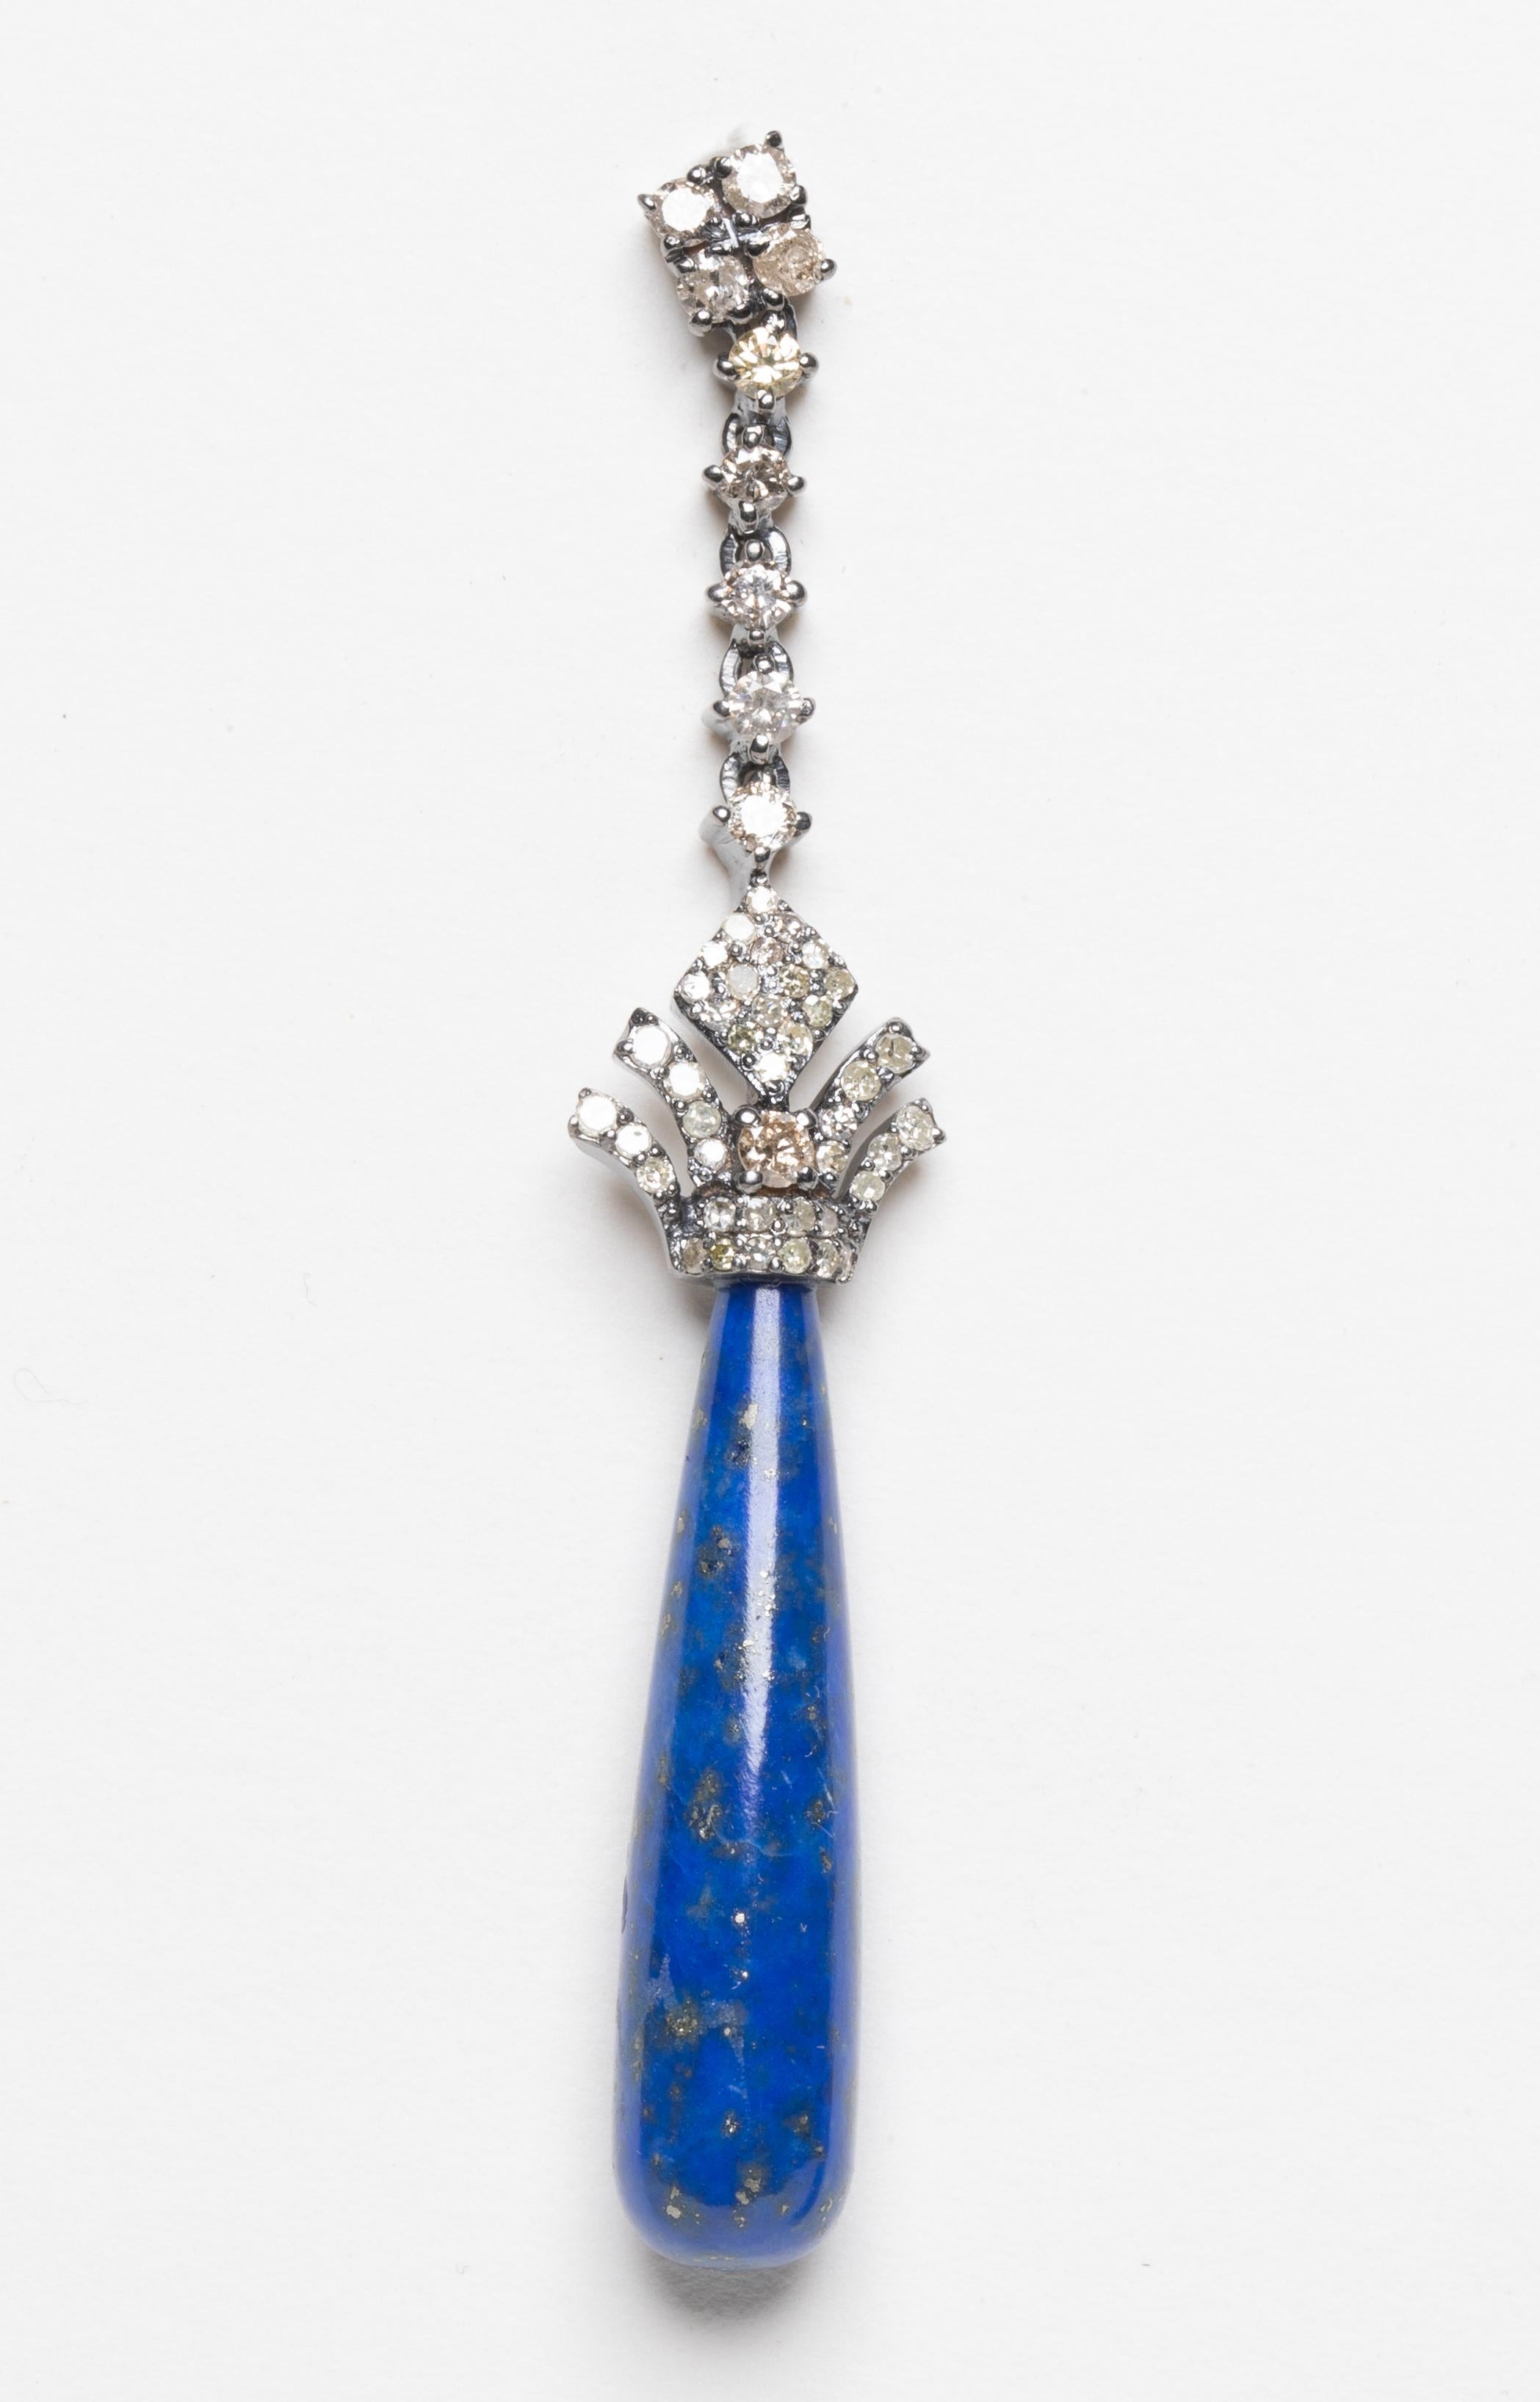 A stunning pair of round, brilliant cut diamonds set in sterling silver with a long lapis lazuli drop held by a crown of diamonds.  18K post for pierced ears.   Diamond weight totals 1.51 carats, lapis totals 24.80 carats.

The fine jewelry